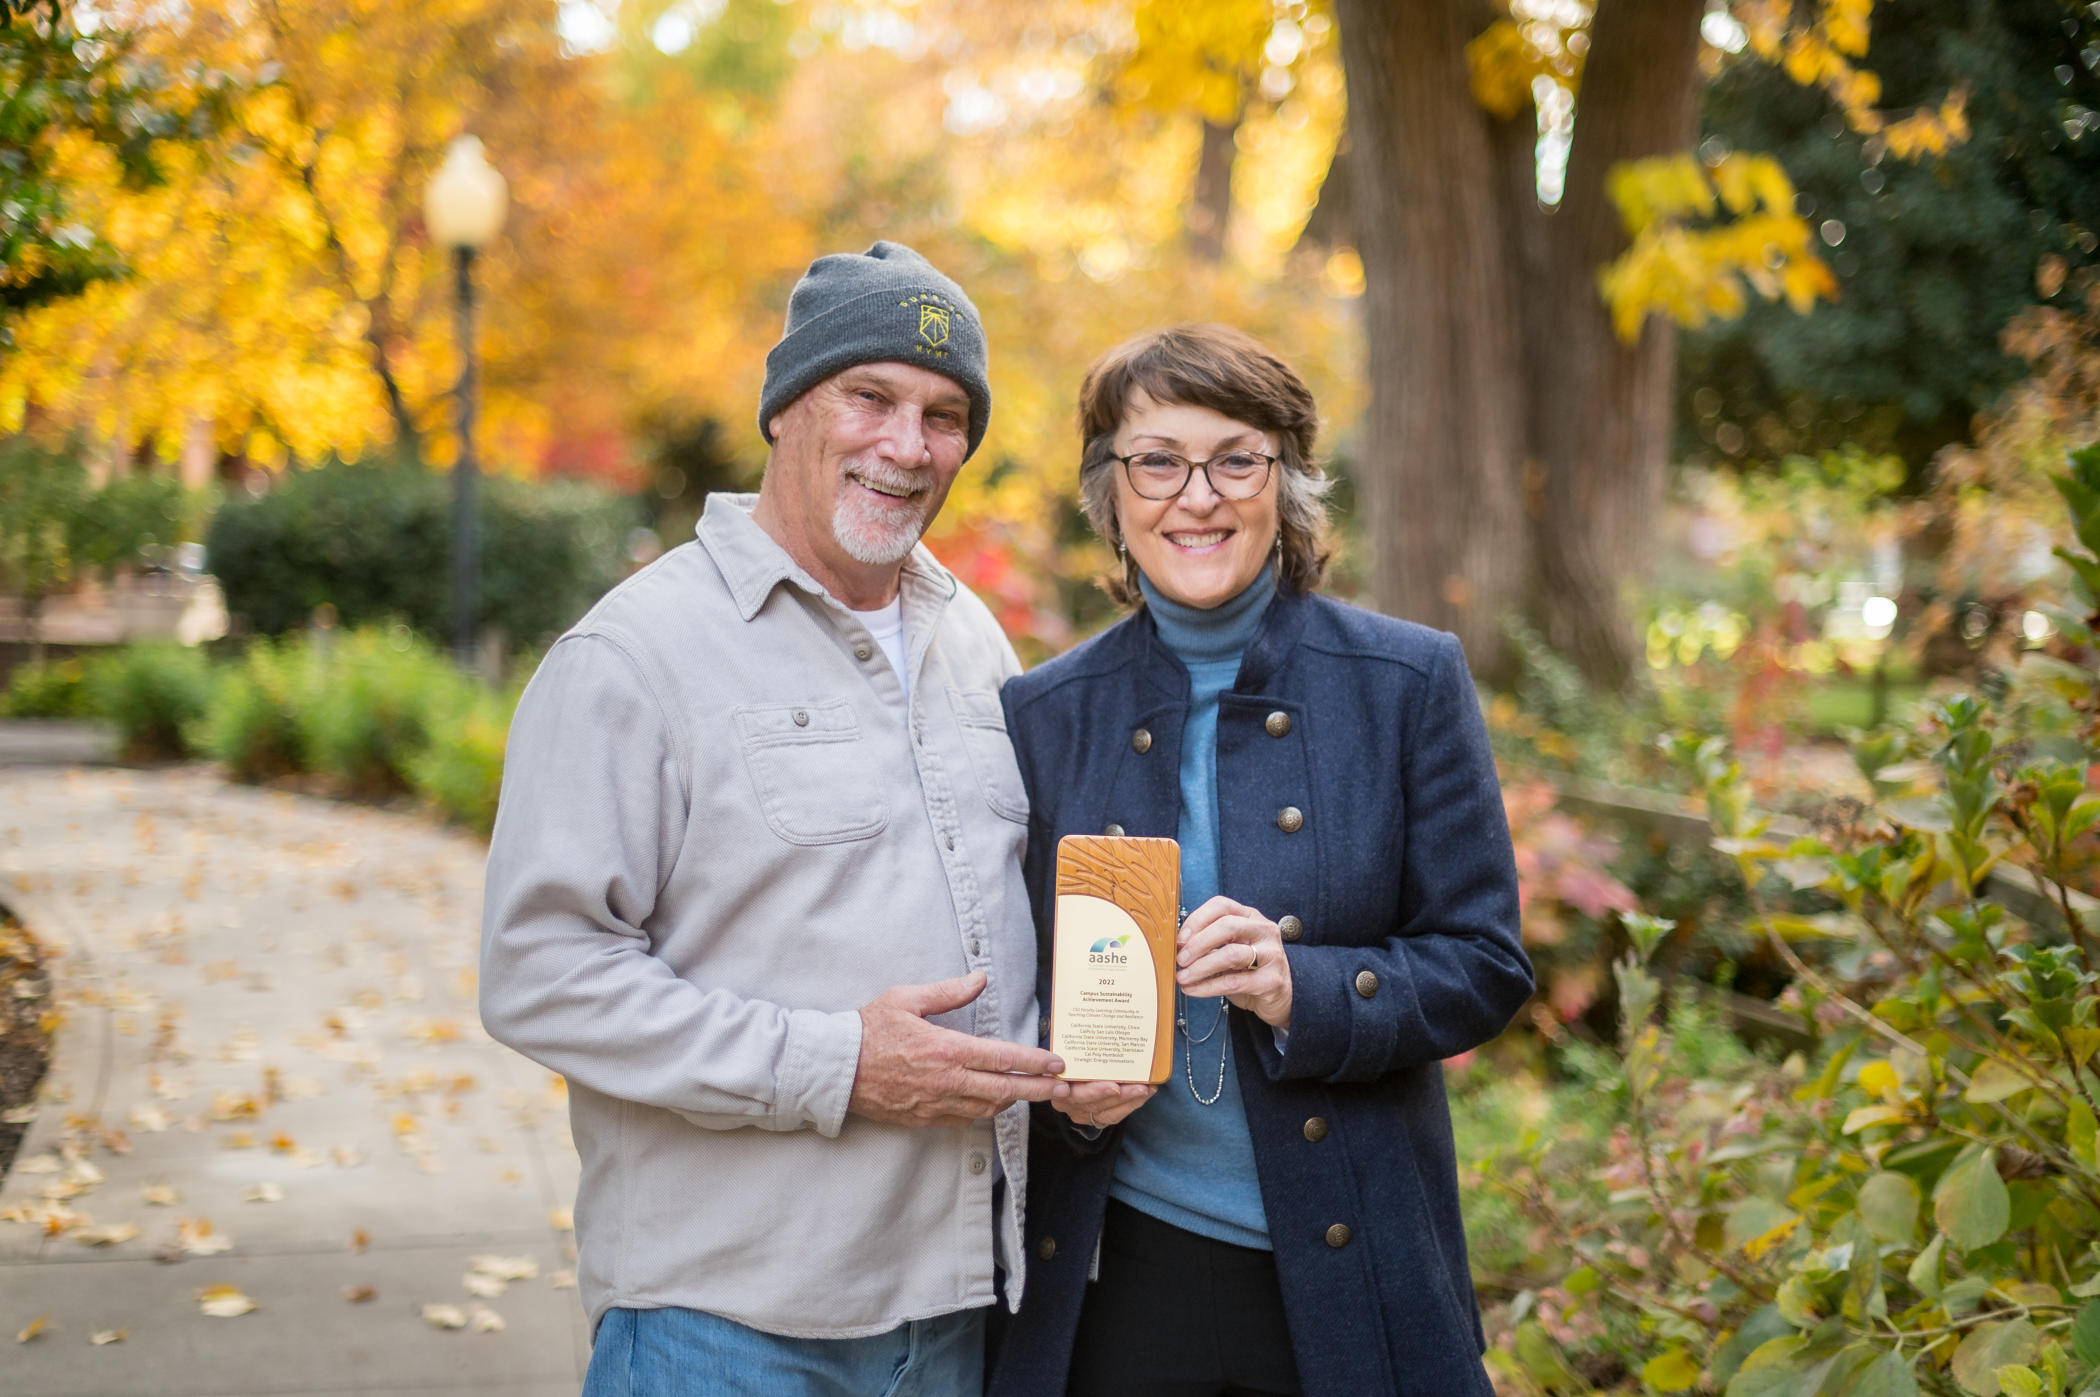 Professor Mark Stemen poses for a photo with Chico State President Gayle Hutchin as they hold the Association for the Advancement of Sustainability in Higher Education (AASHE) Campus Sustainability Achievement Award.